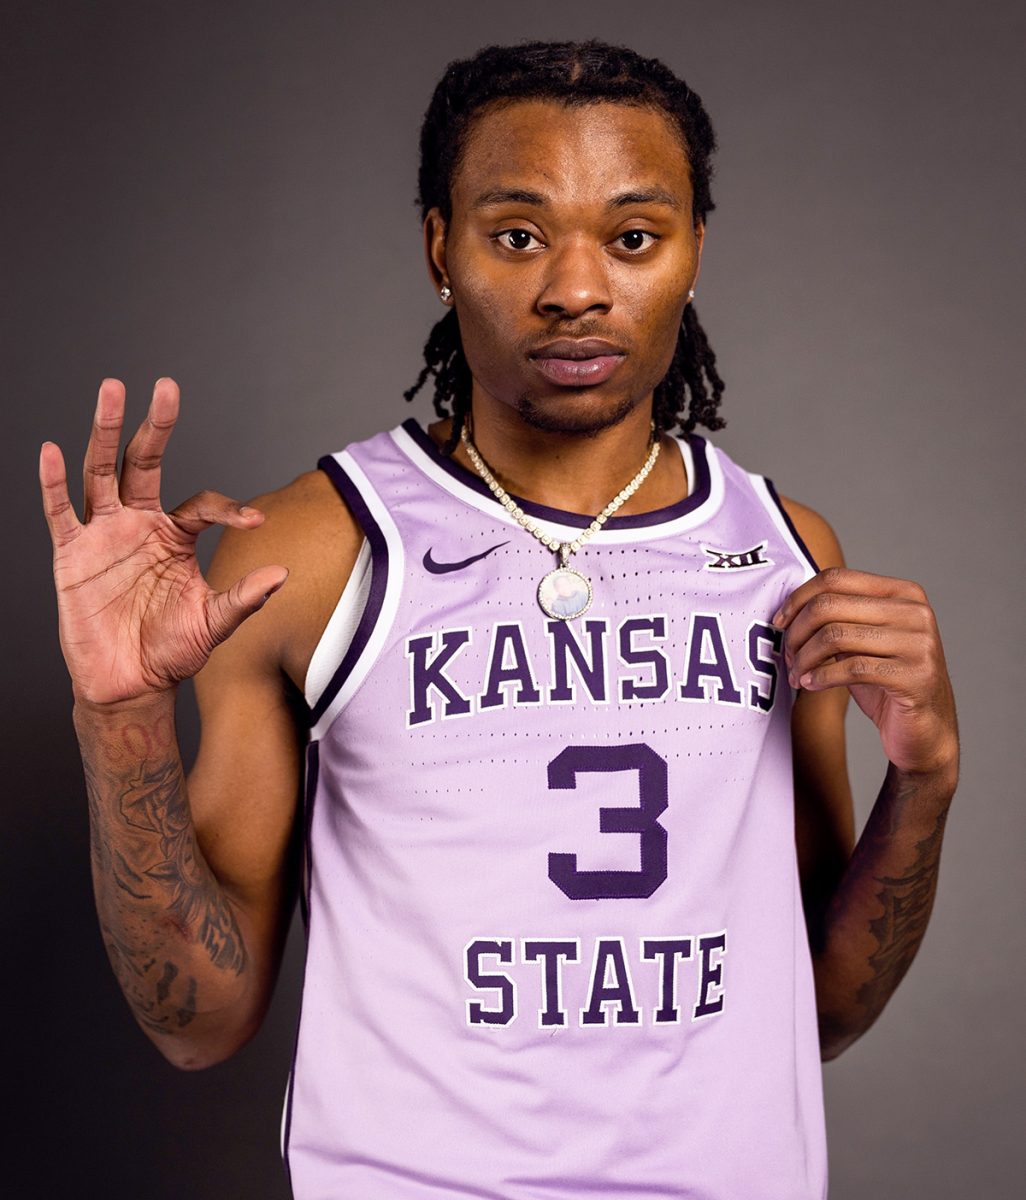 UCI transfer forward CJ Jones posses for a photo on his visit to K-State. Jones has committed to K-State after averaging 11.4 points, 4.8 assists and 3.5 rebounds during his sophomore campaign this year. (Photo courtesy of K-State Athletics)